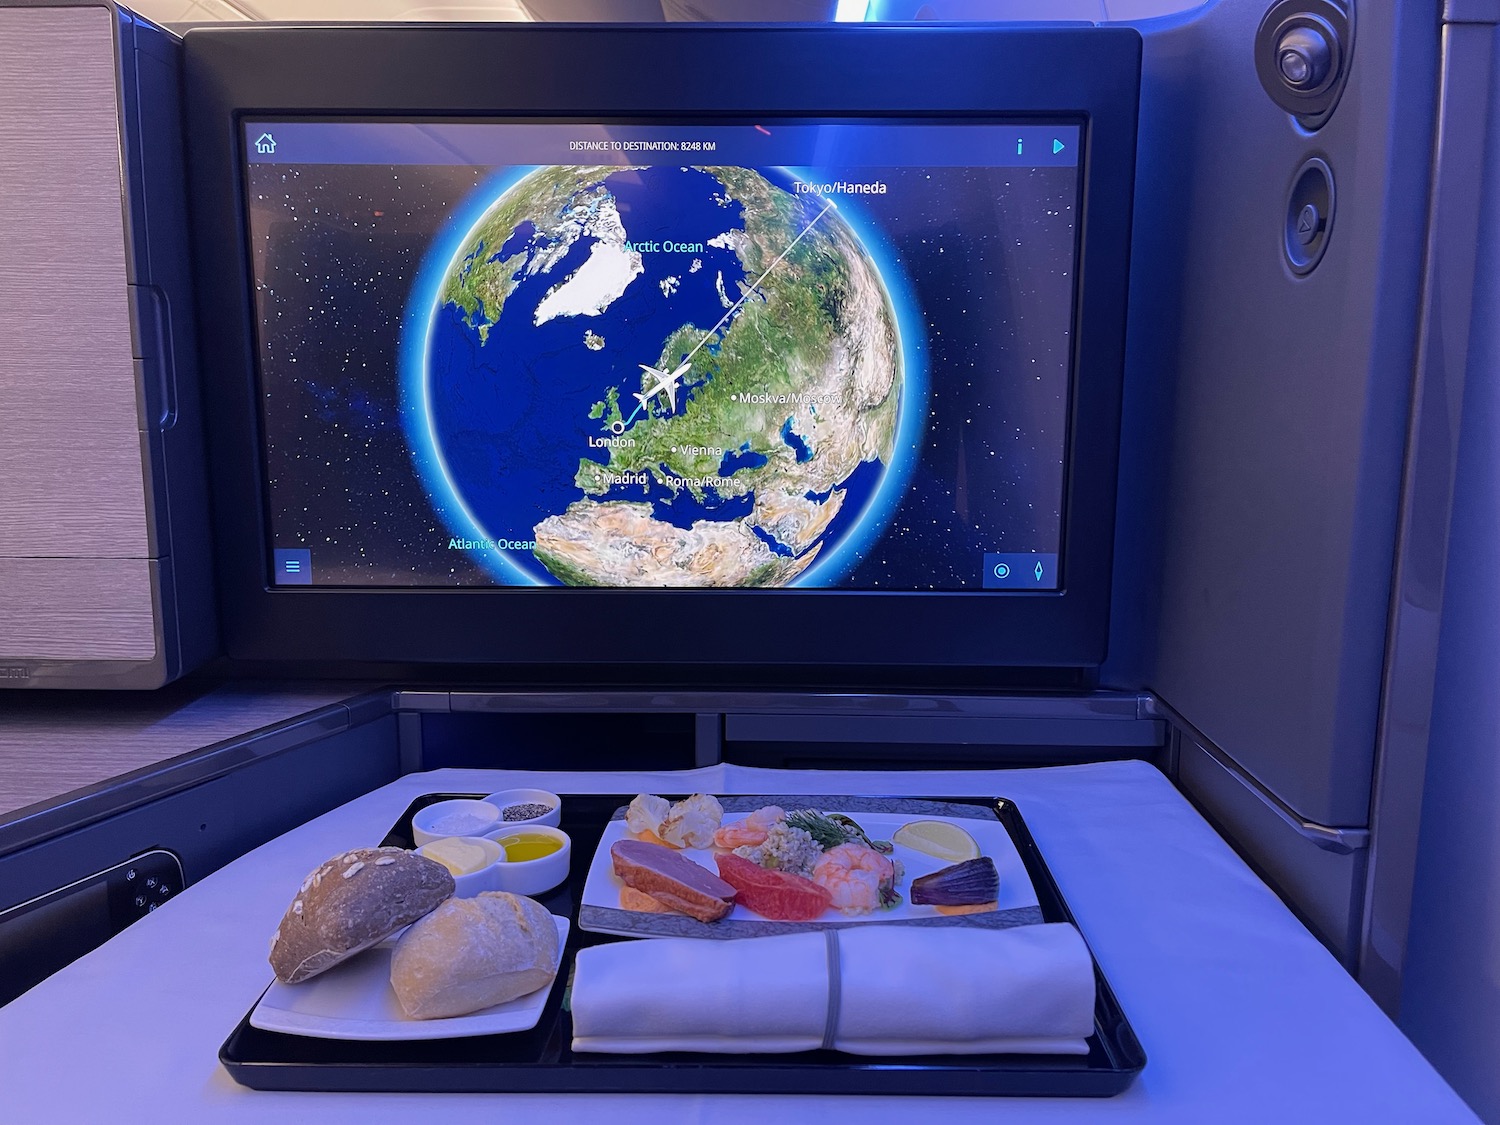 a screen on a tray of food